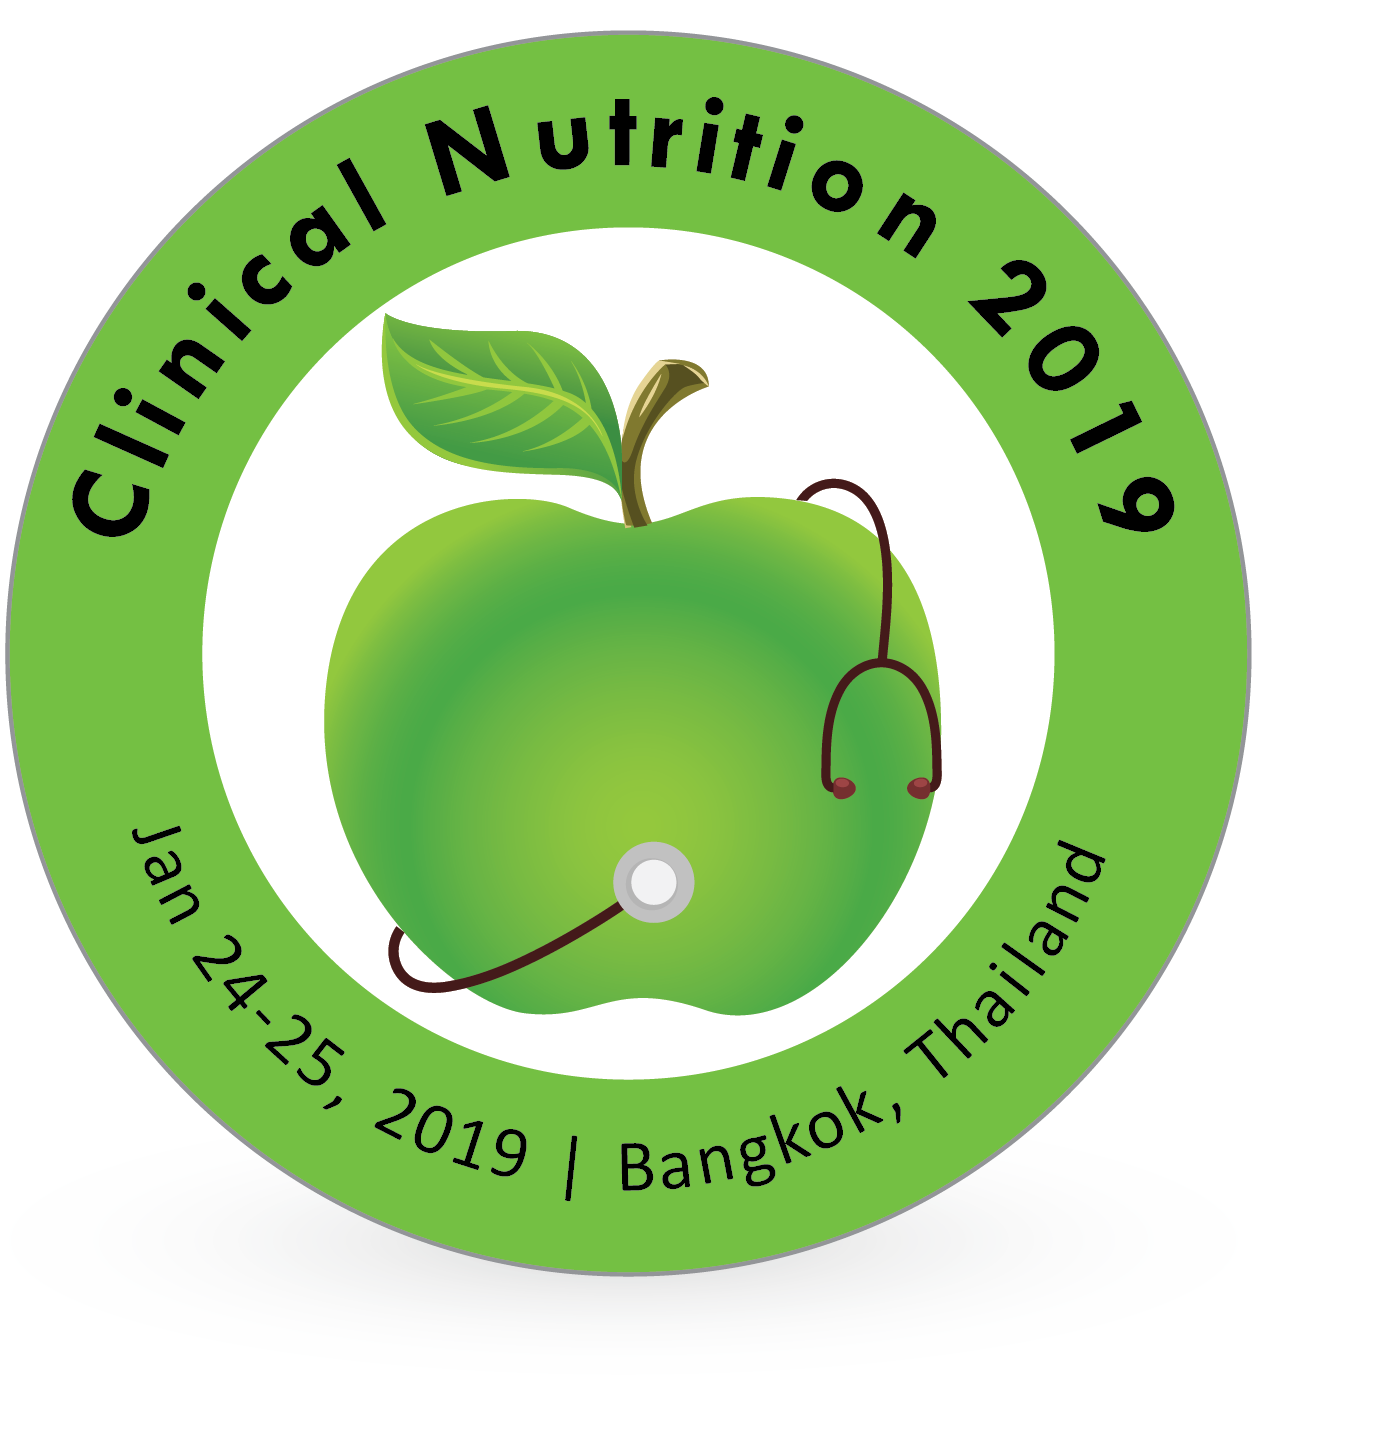 Photos of International Conference on Clinical Nutrition